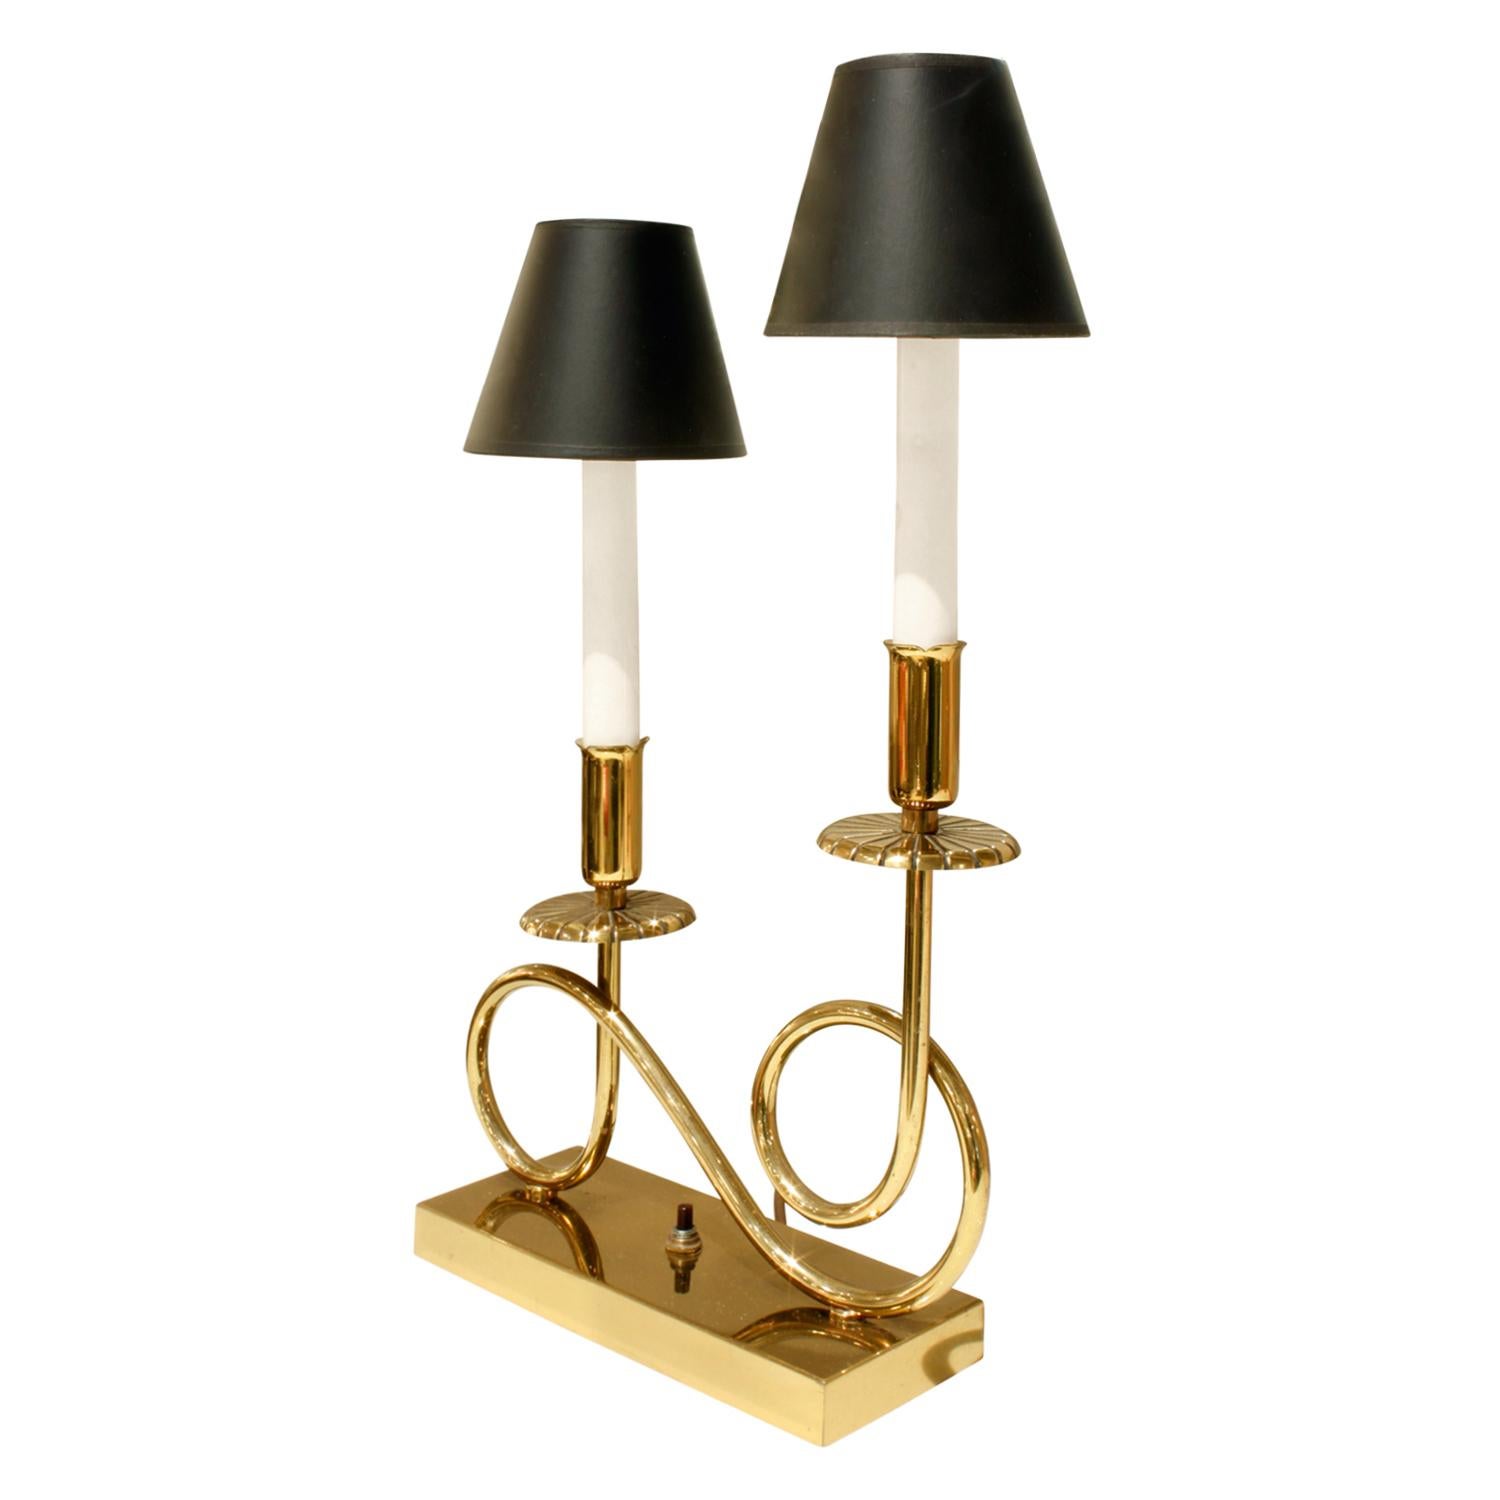 Pair of elegant brass table lamps, each with 2 lights, in the style of Tommi Parzinger, American 1950's  Shades are black paper.

W: 10 inches / 11 inches with shades
D: 3.5 inches / 4 inches with shades
H: 18.5 inches